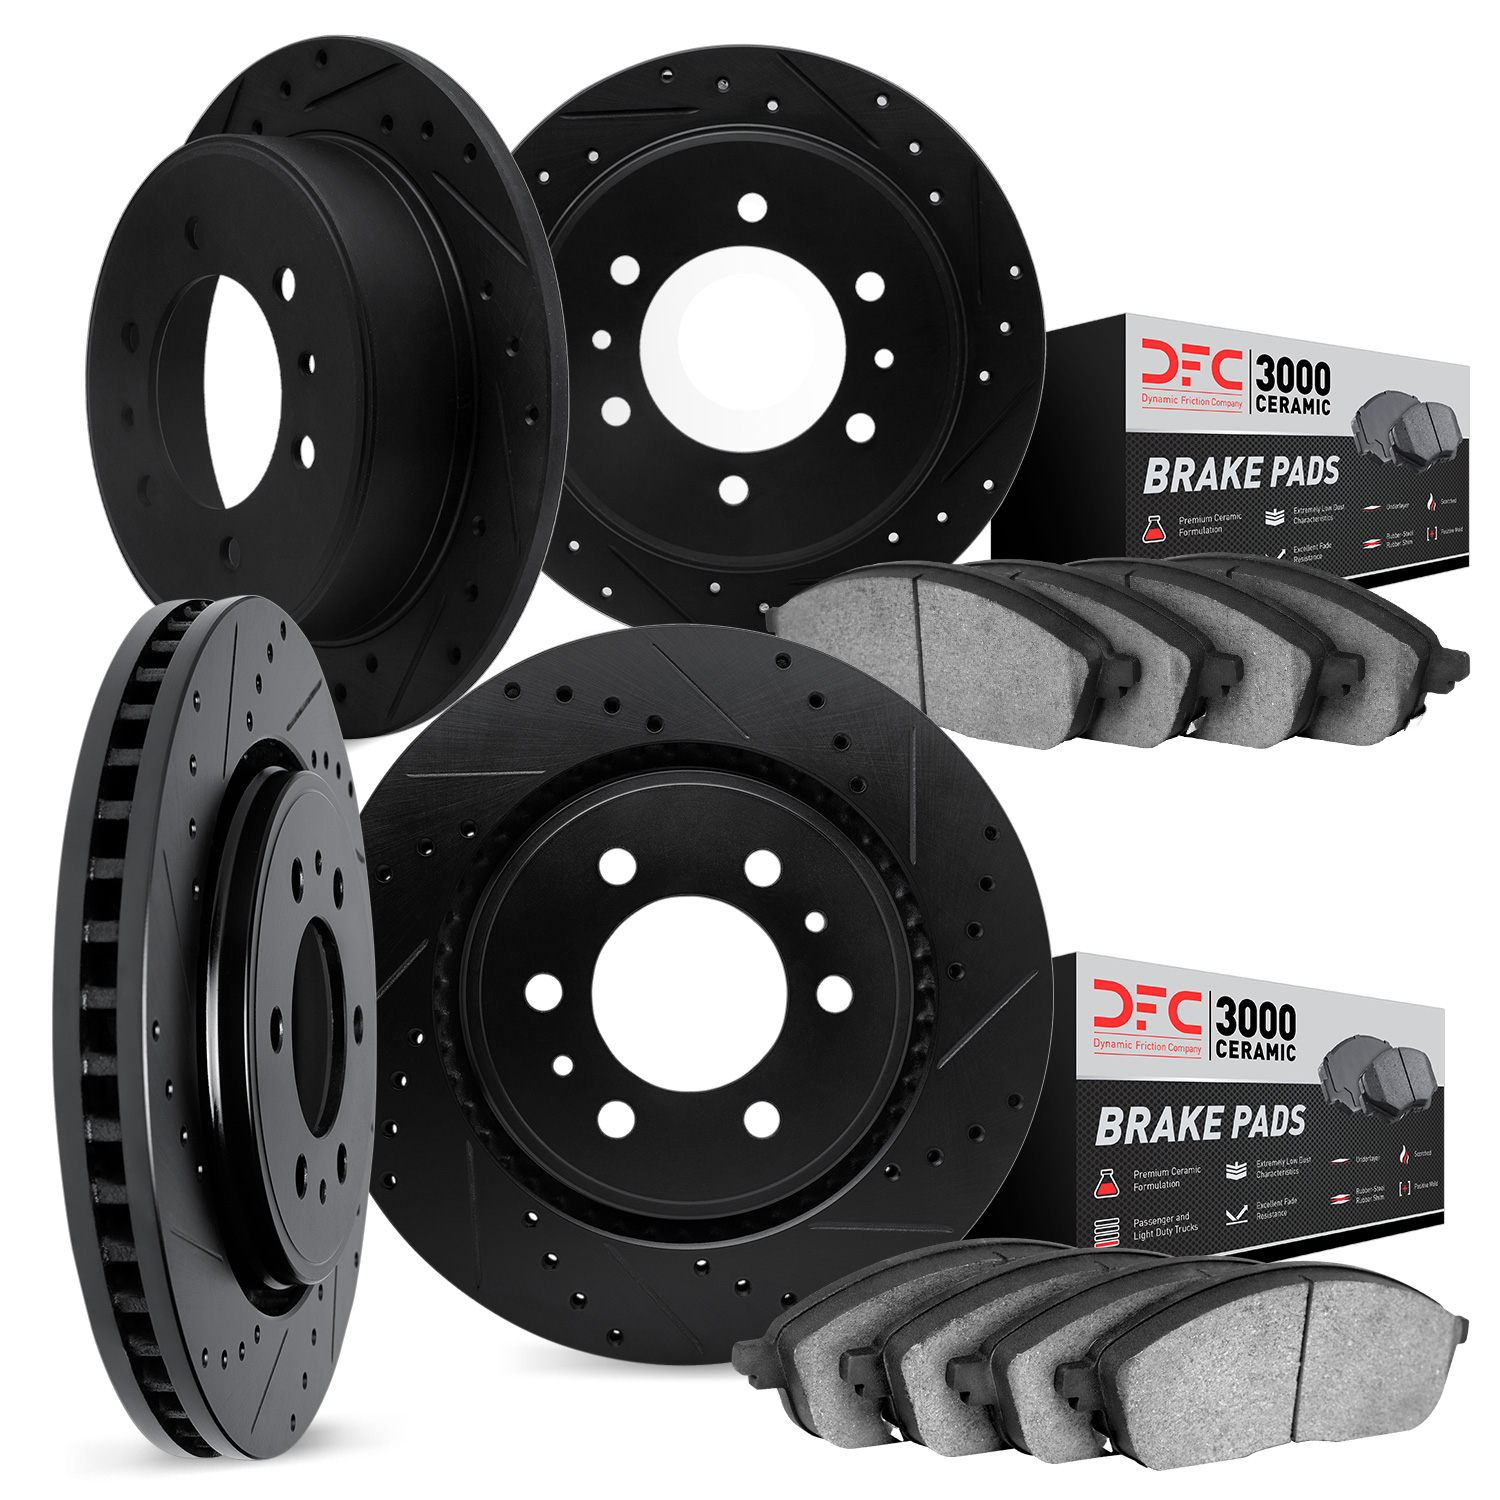 8304-72022 Drilled/Slotted Brake Rotors with 3000-Series Ceramic Brake Pads Kit [Black], 1997-2004 Mitsubishi, Position: Front a